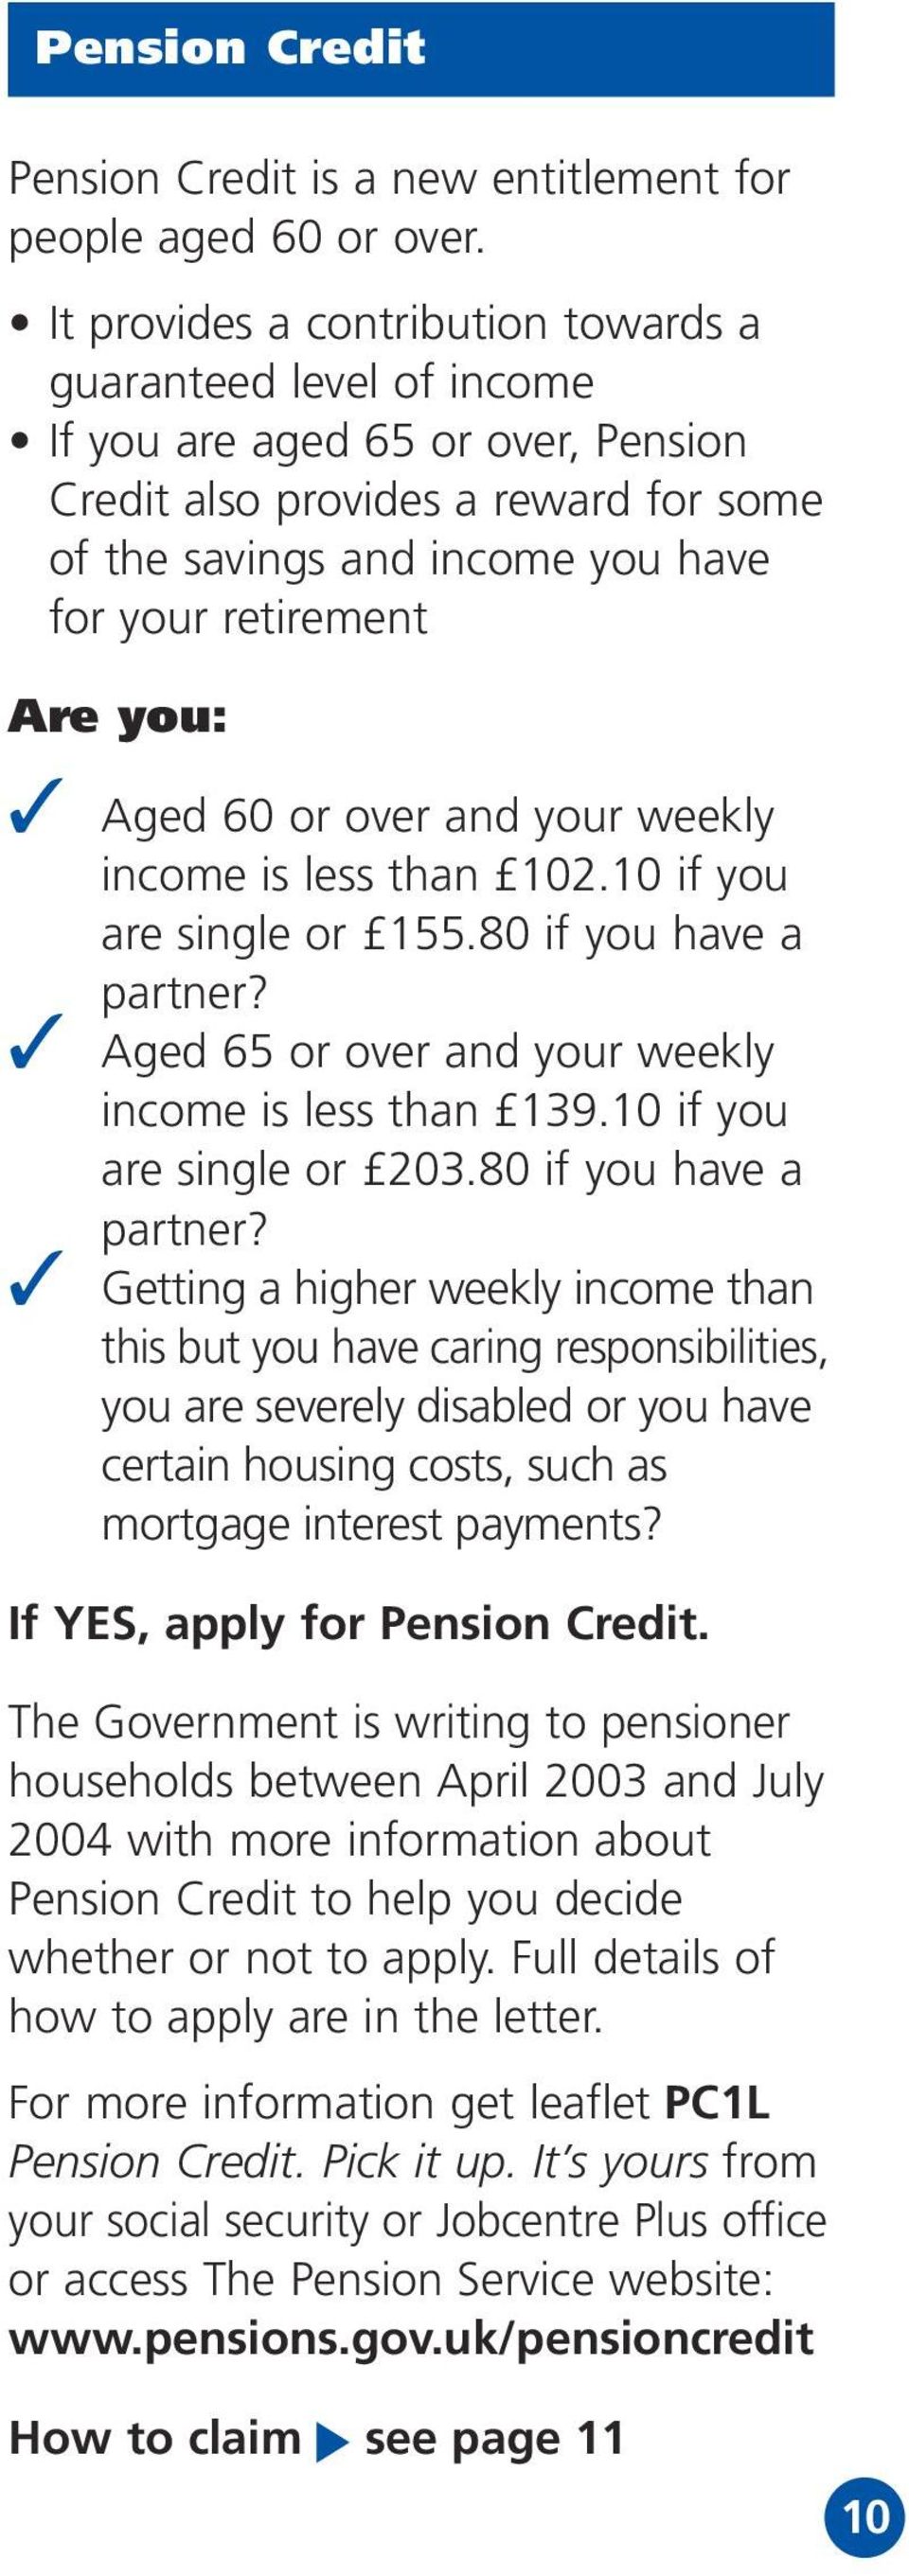 you: Aged 60 or over and your weekly income is less than 102.10 if you are single or 155.80 if you have a partner? Aged 65 or over and your weekly income is less than 139.10 if you are single or 203.